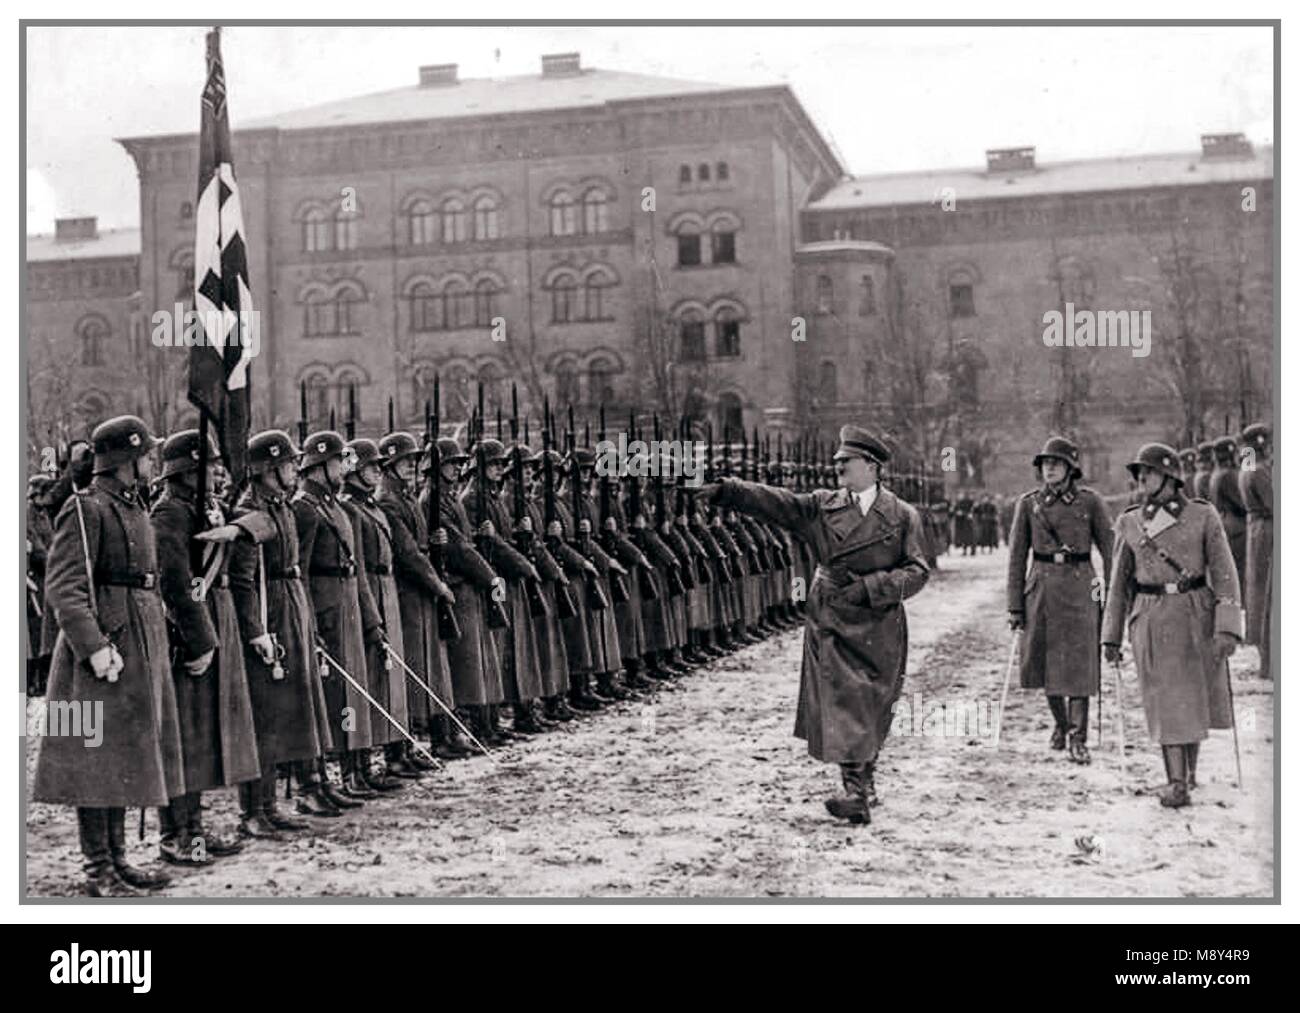 ADOLF HITLER TAKING SALUTE FROM LEIBSTANDARTE PARADE Vintage pre-WW2 black and white photo of men of Leibstandarte 'Adolf Hitler' WAFFEN SS troops at the Lichterfelde barracks in Berlin, Germany, November 22, 1938. Stock Photo